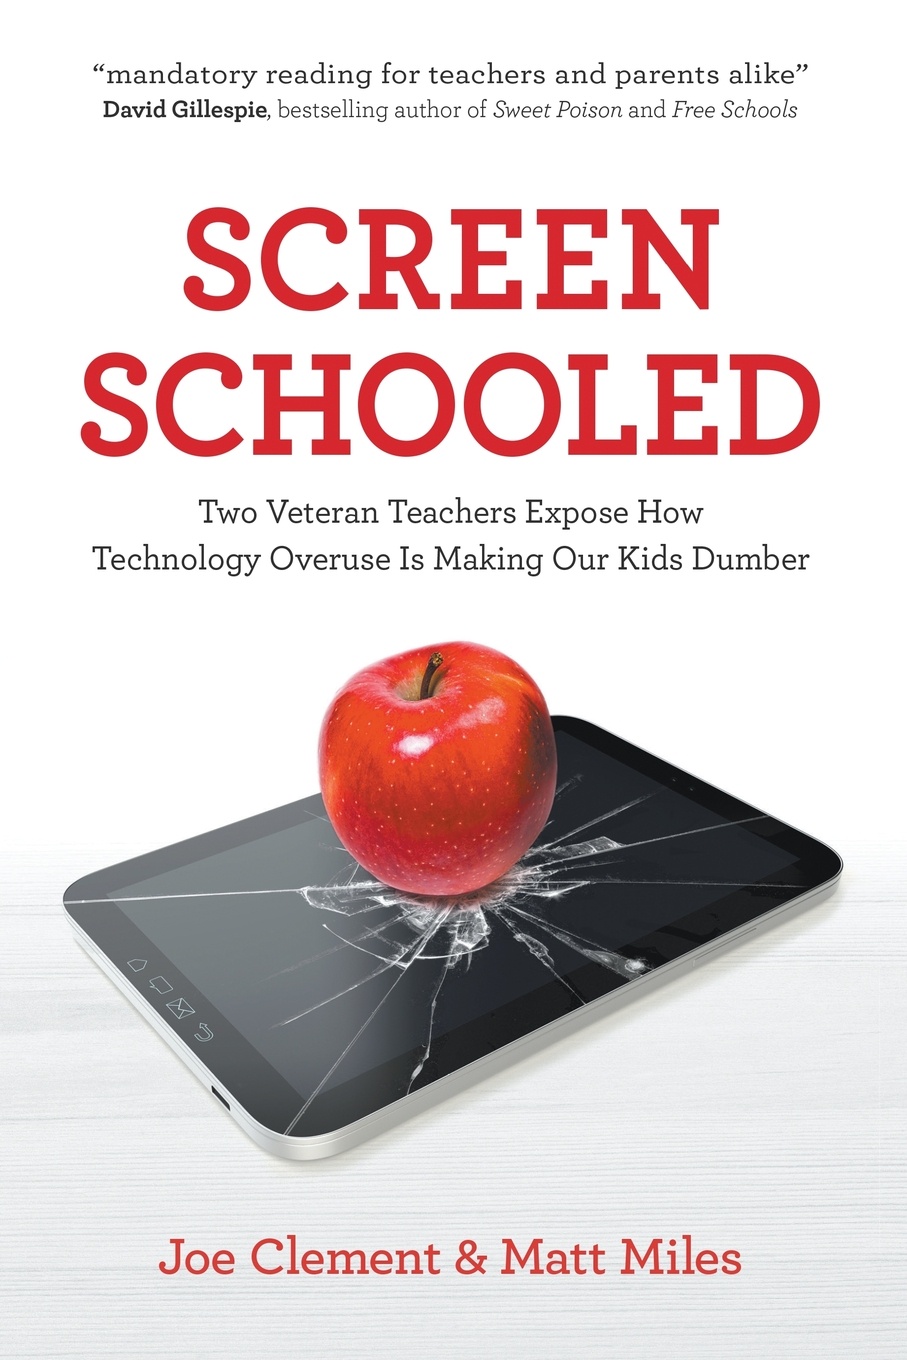 Screen Schooled. Two Veteran Teachers Expose How Technology Overuse is Making Our Kids Dumber